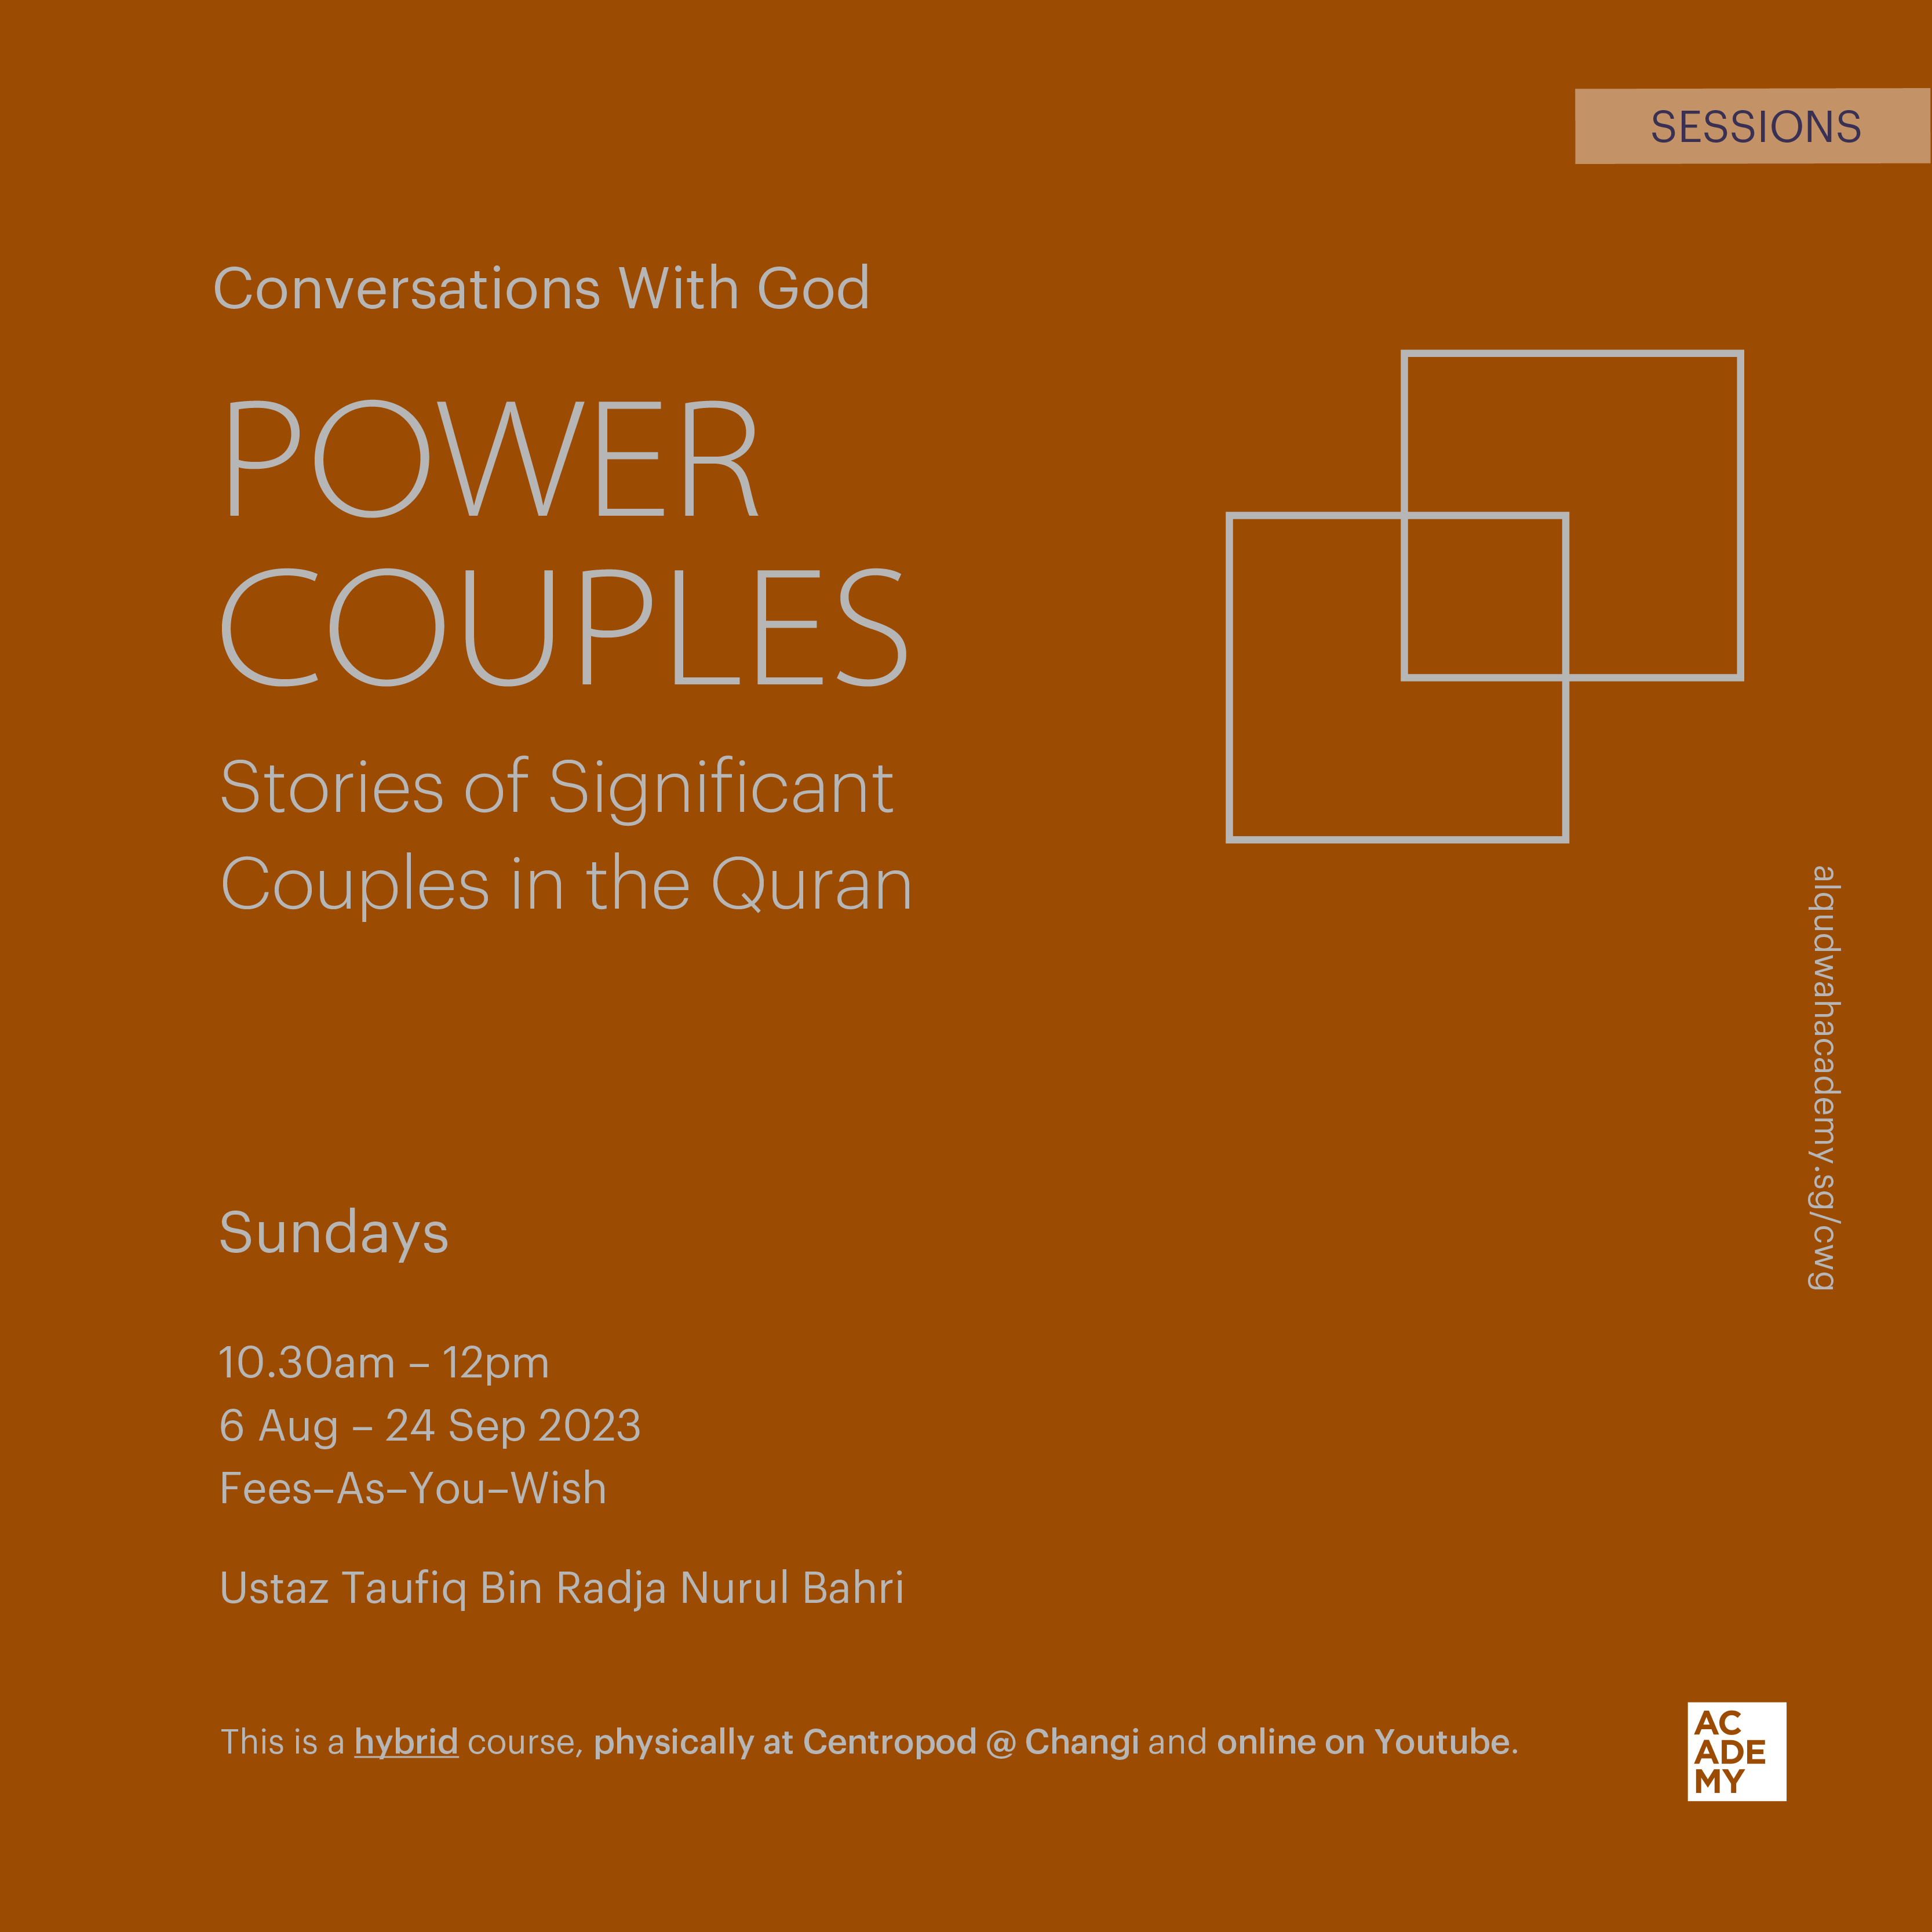 POWER COUPLE:<br />
SIGNIFICANT STORIES OF<br />
COUPLES IN THE QURAN